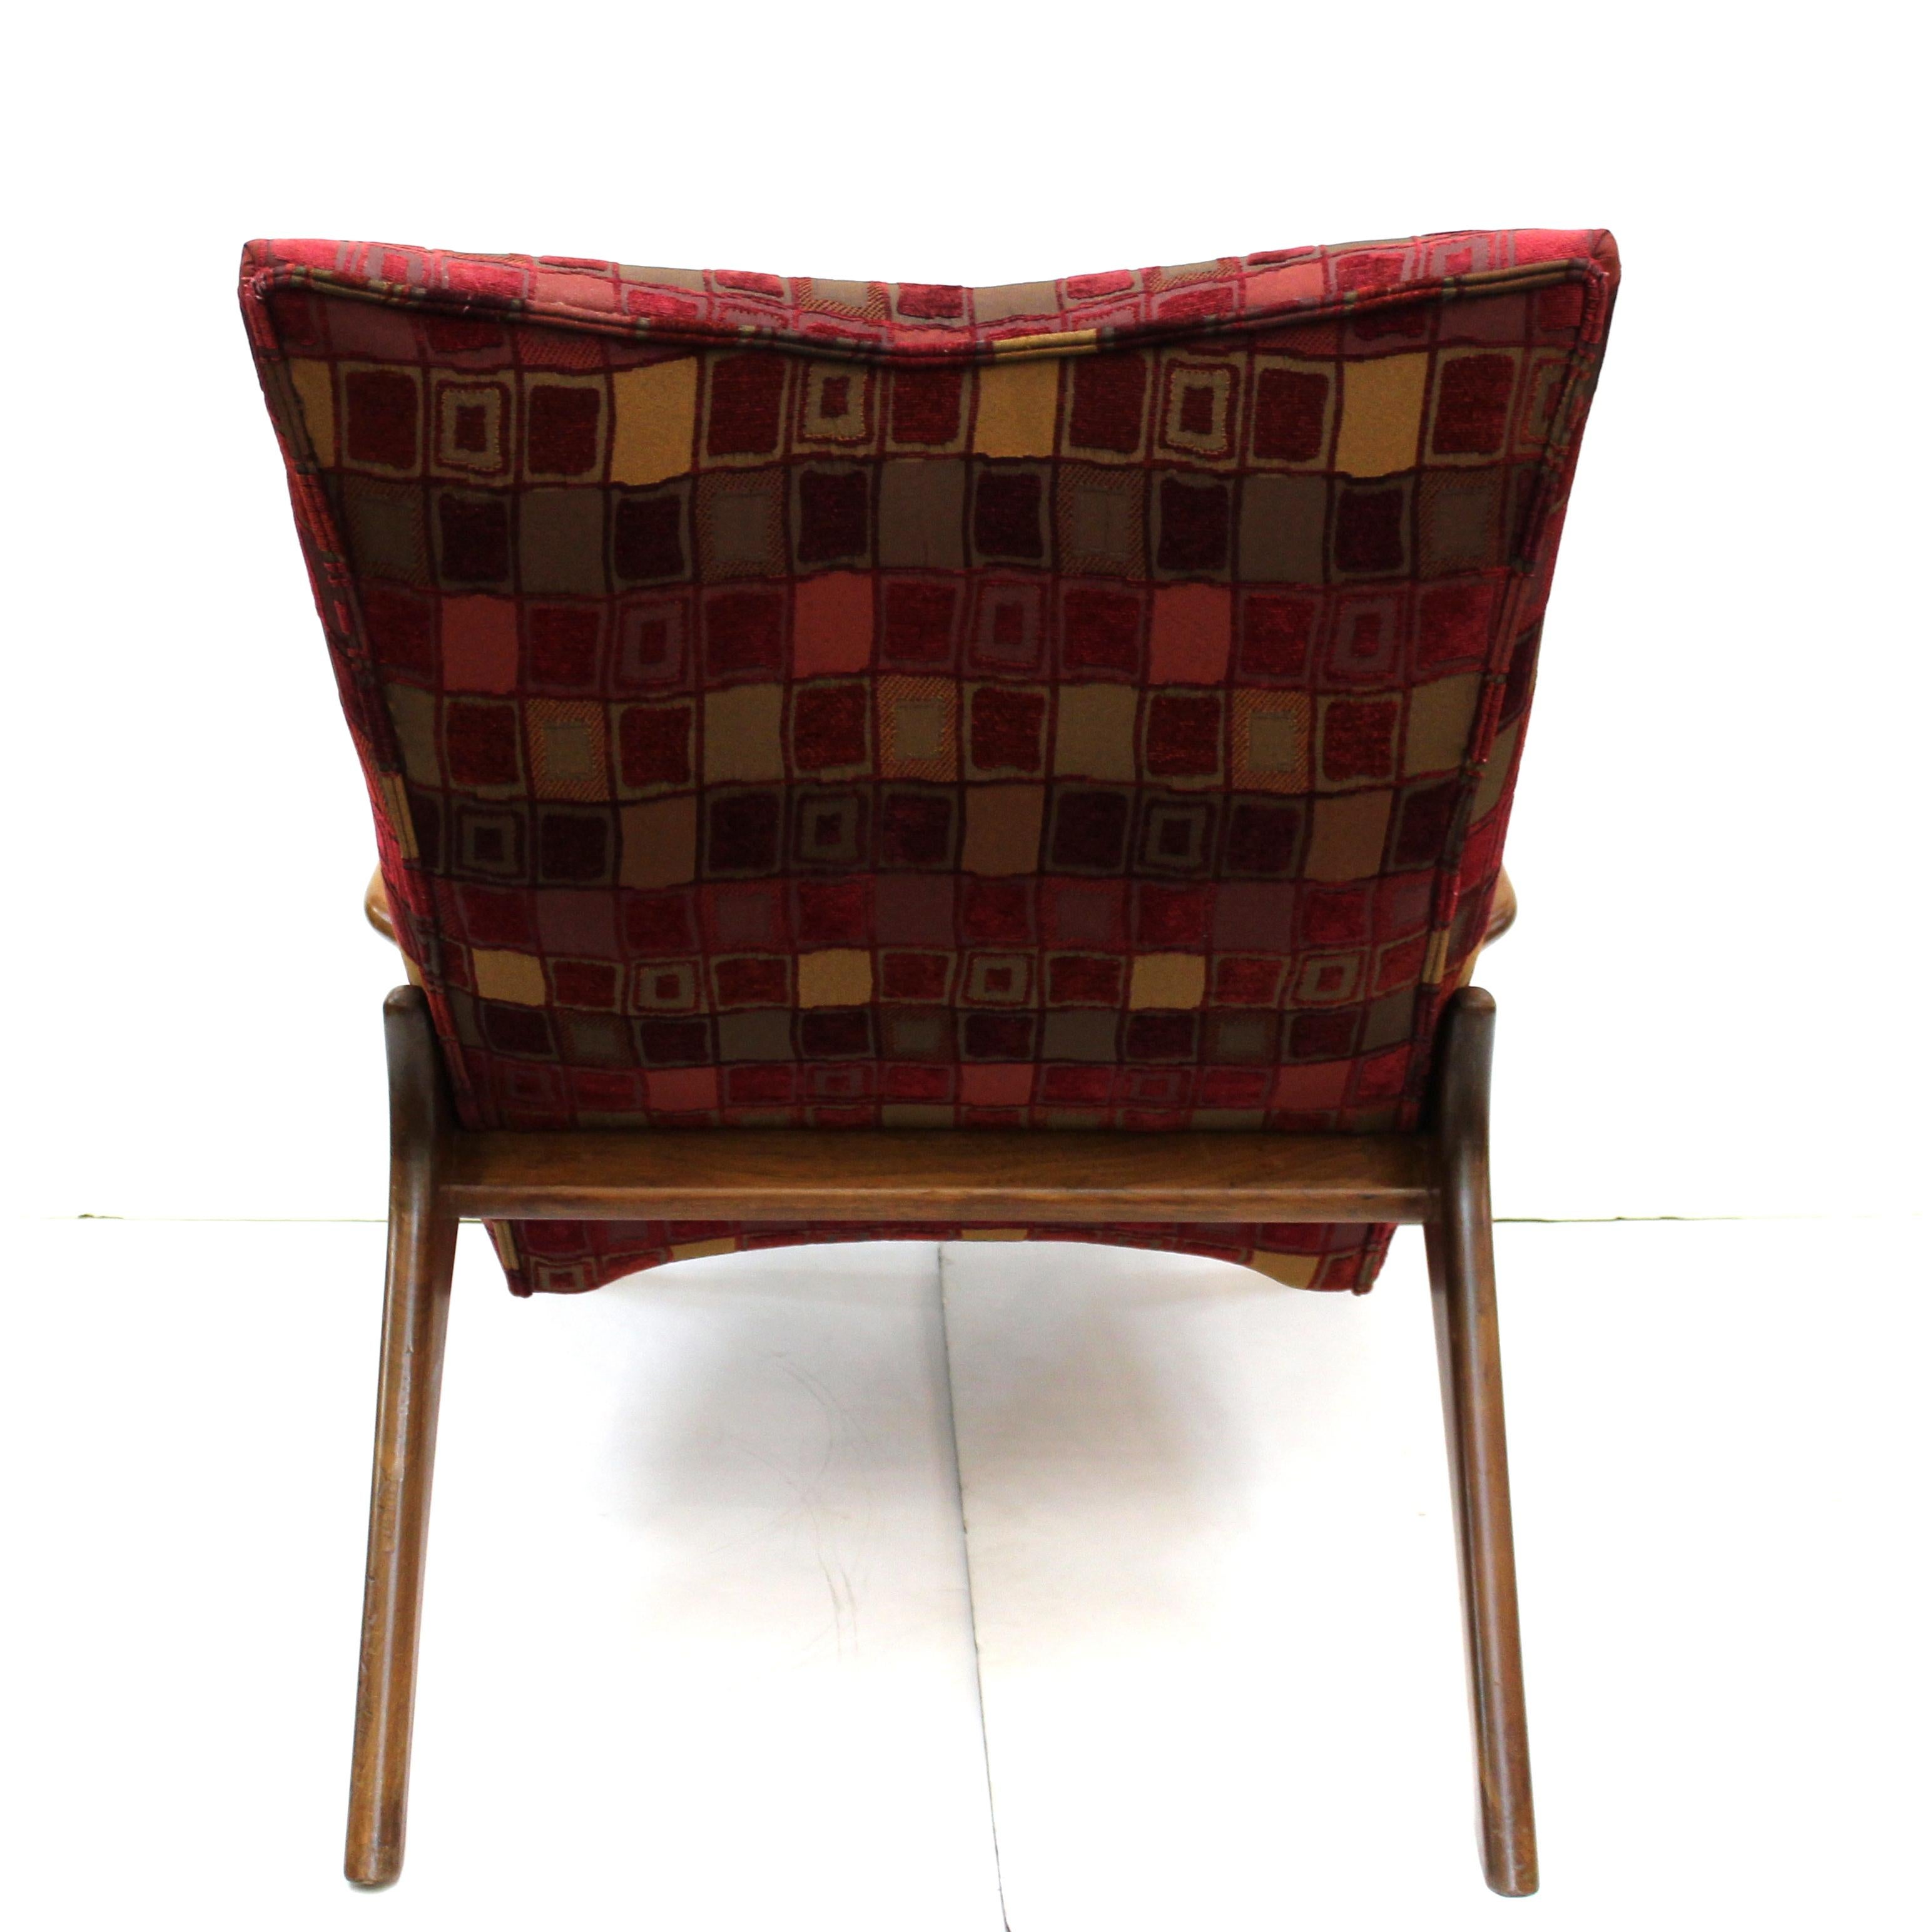 Mid-20th Century Adrian Pearsall for Craft Associates Mid-Century Modern Lounge Chair